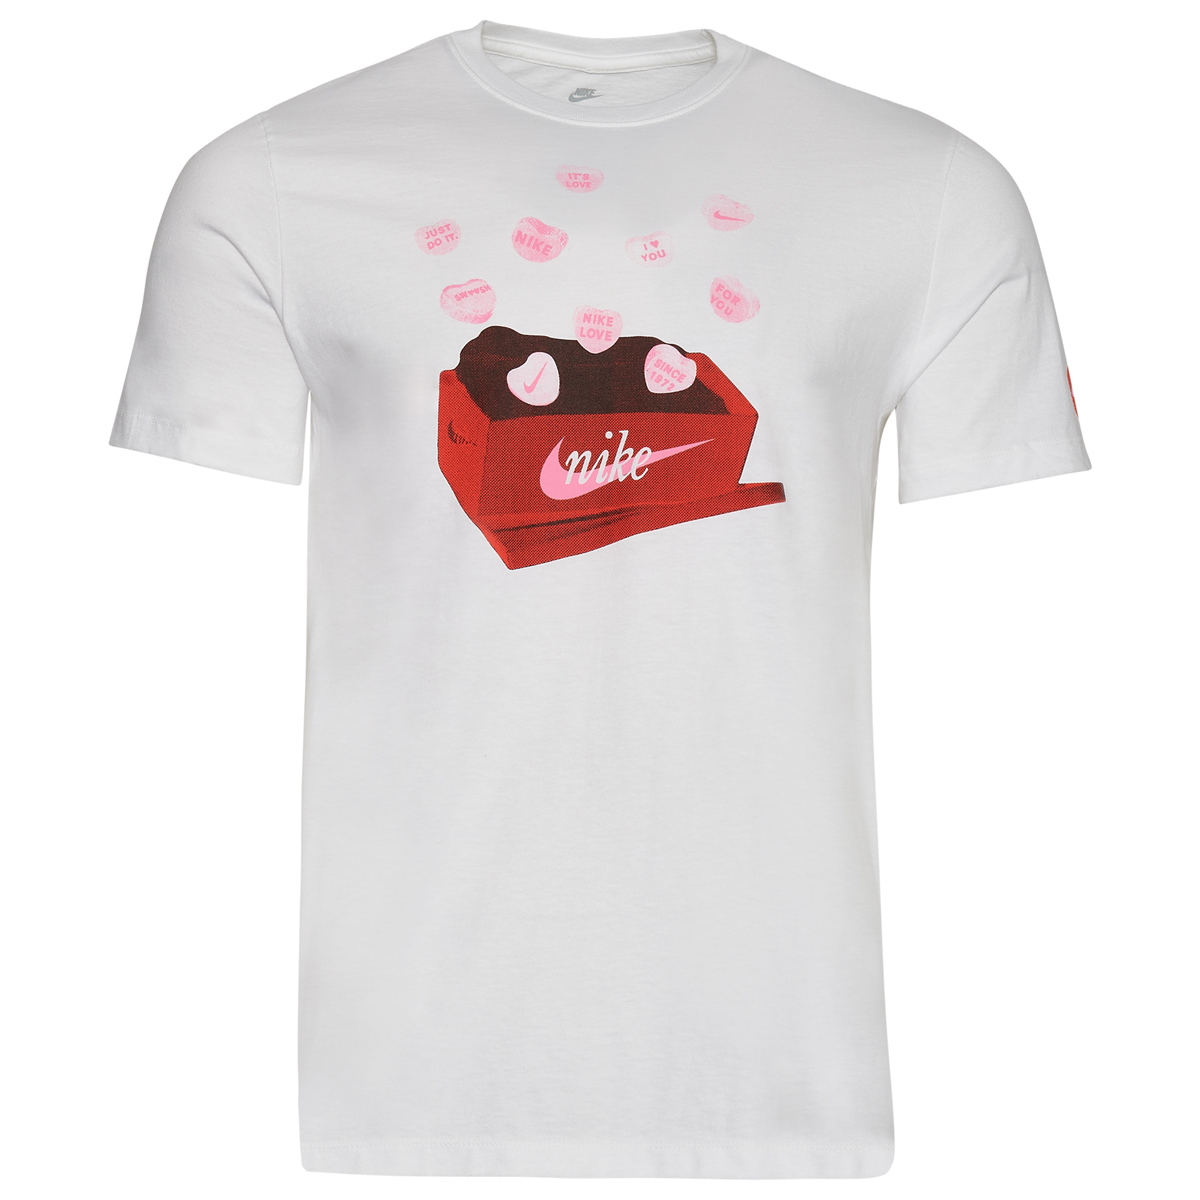 Nike-Sweet-Sneakers-Valentines-Day-T-Shirt-White-1